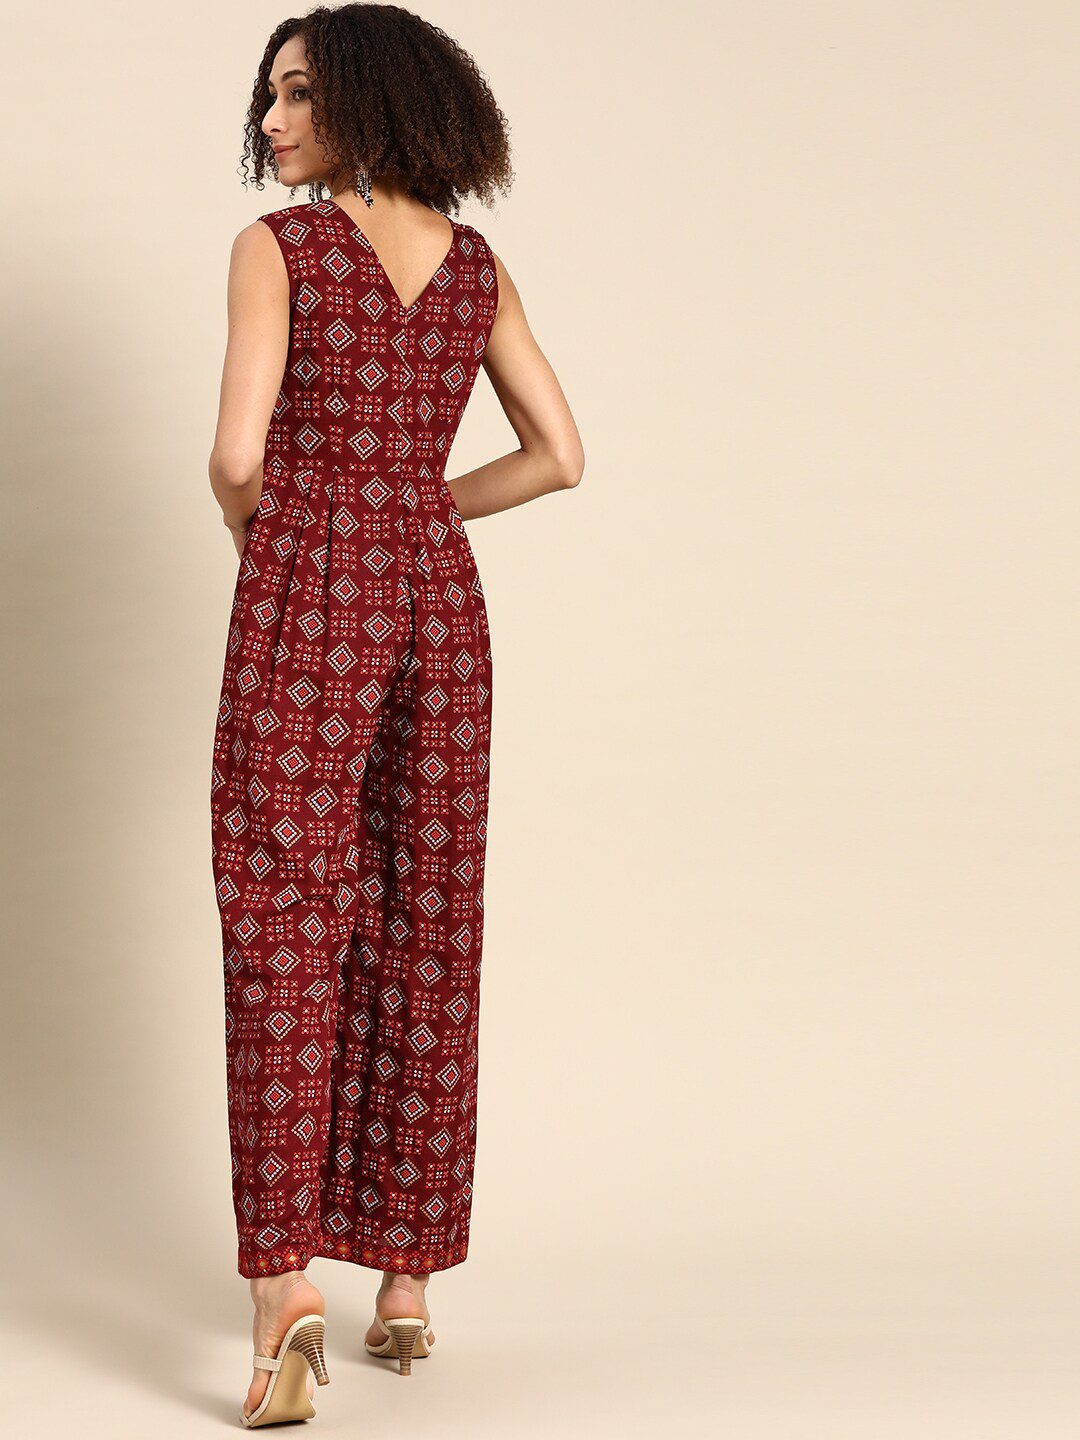 MABISH by Sonal Jain PeachColoured Basic Jumpsuit Price in India Full  Specifications  Offers  DTashioncom